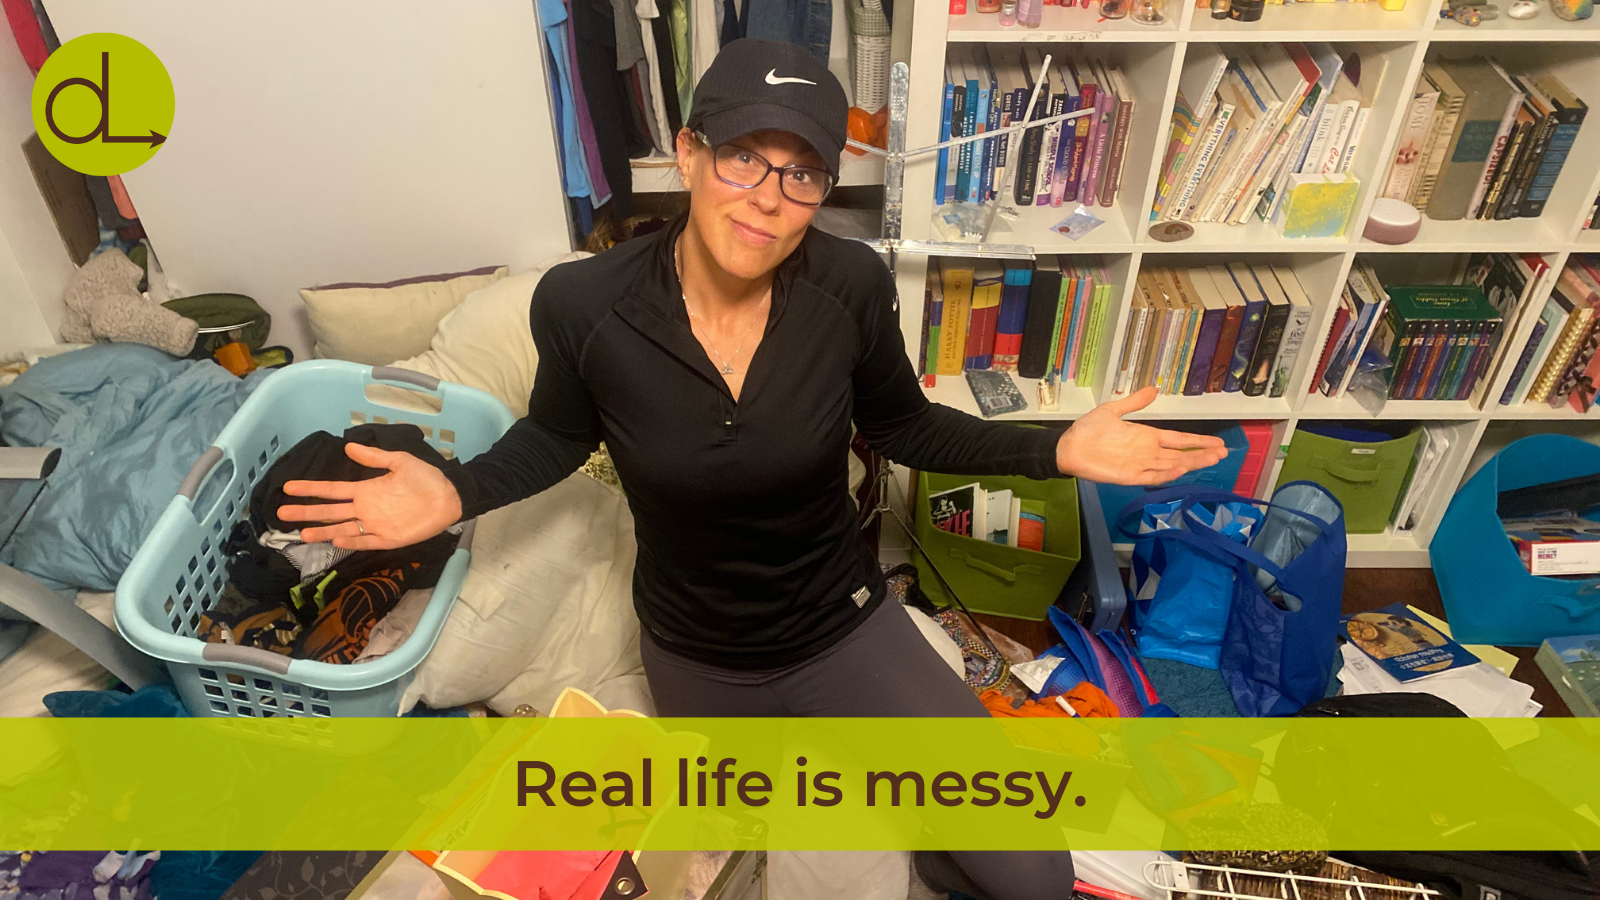 Darcy sitting in a messy room, shrugging, with the caption "Real life is messy."